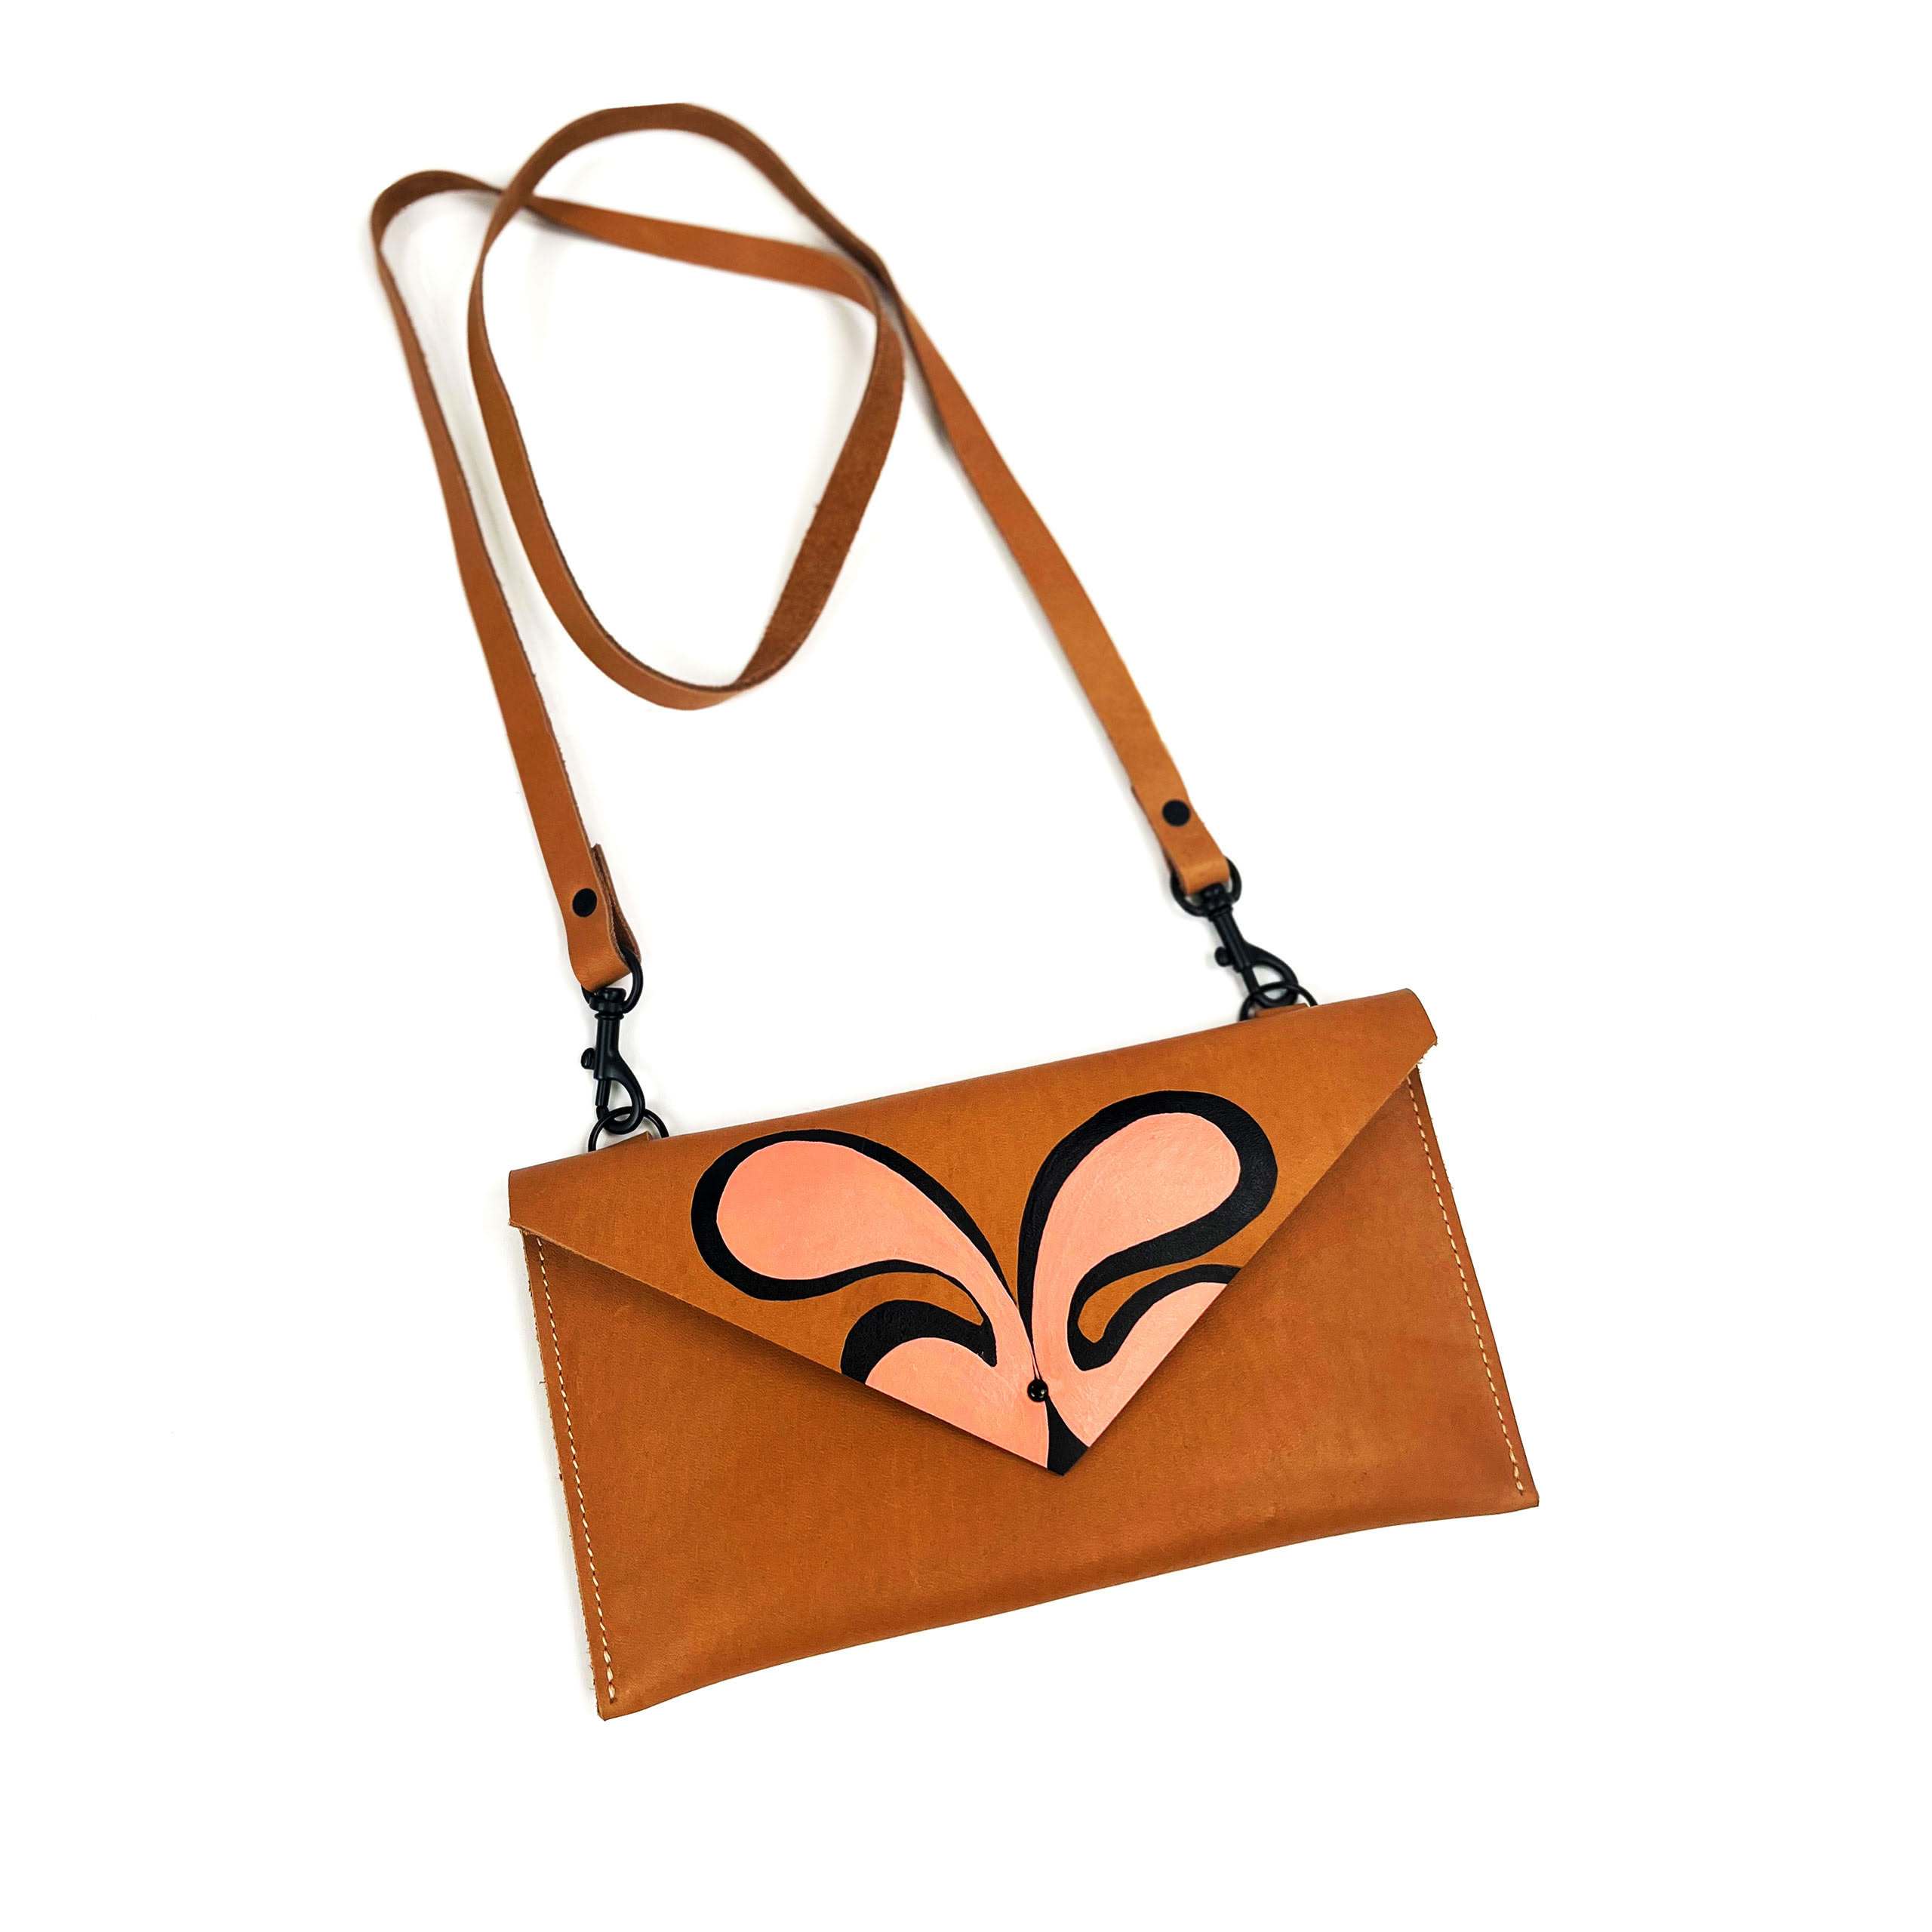 A brown and tan leather shoulder bag with a sparkling peach heart design, isolated on a white background.